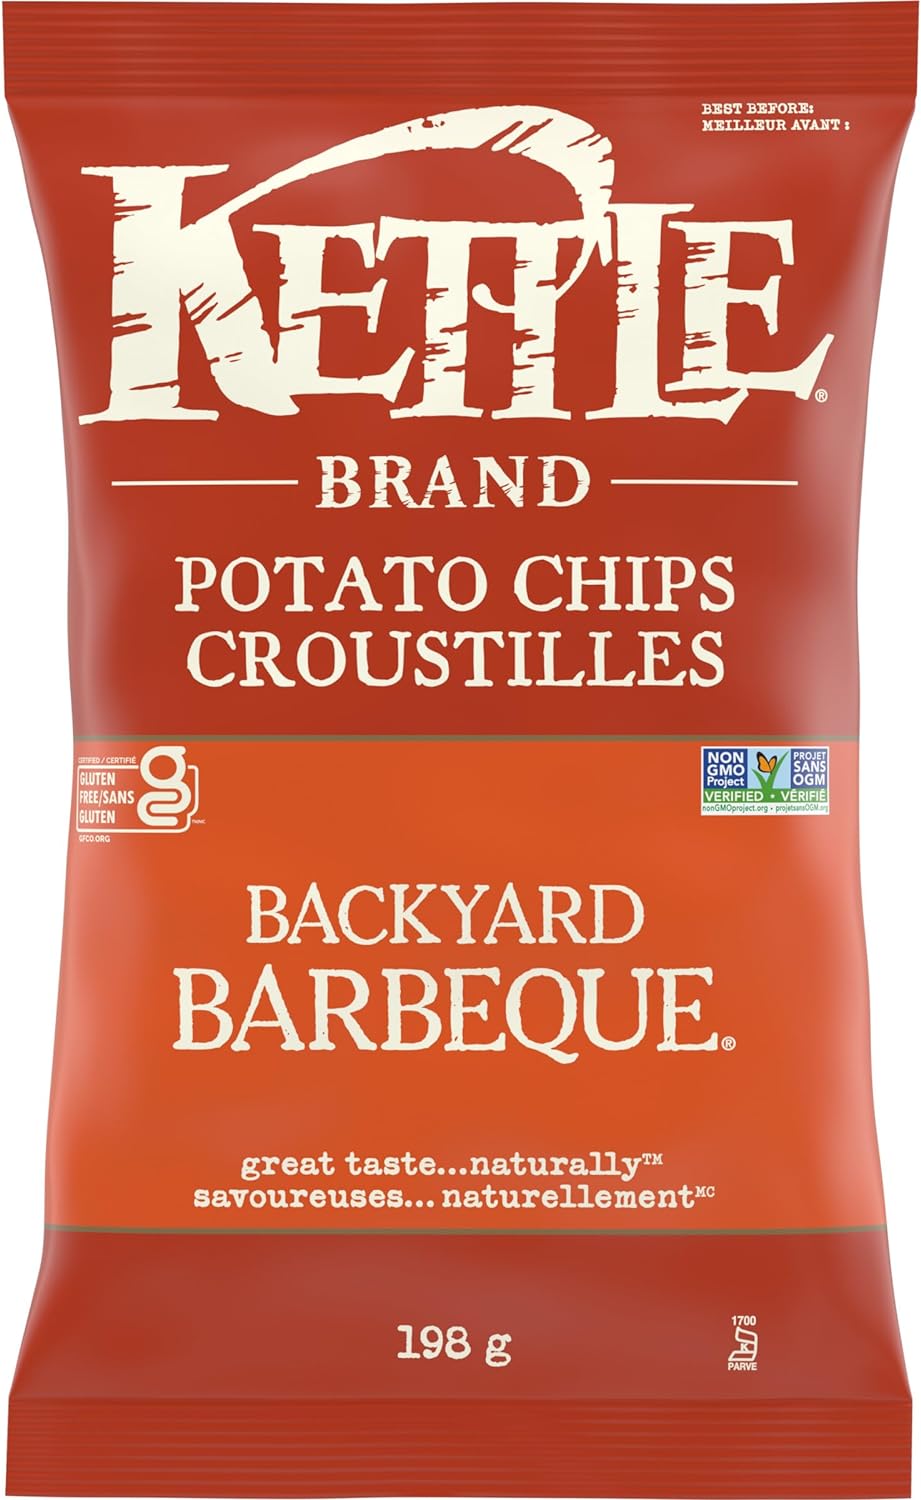 Kettle Brand Backyard Barbeque Potato Chips - Case of 12